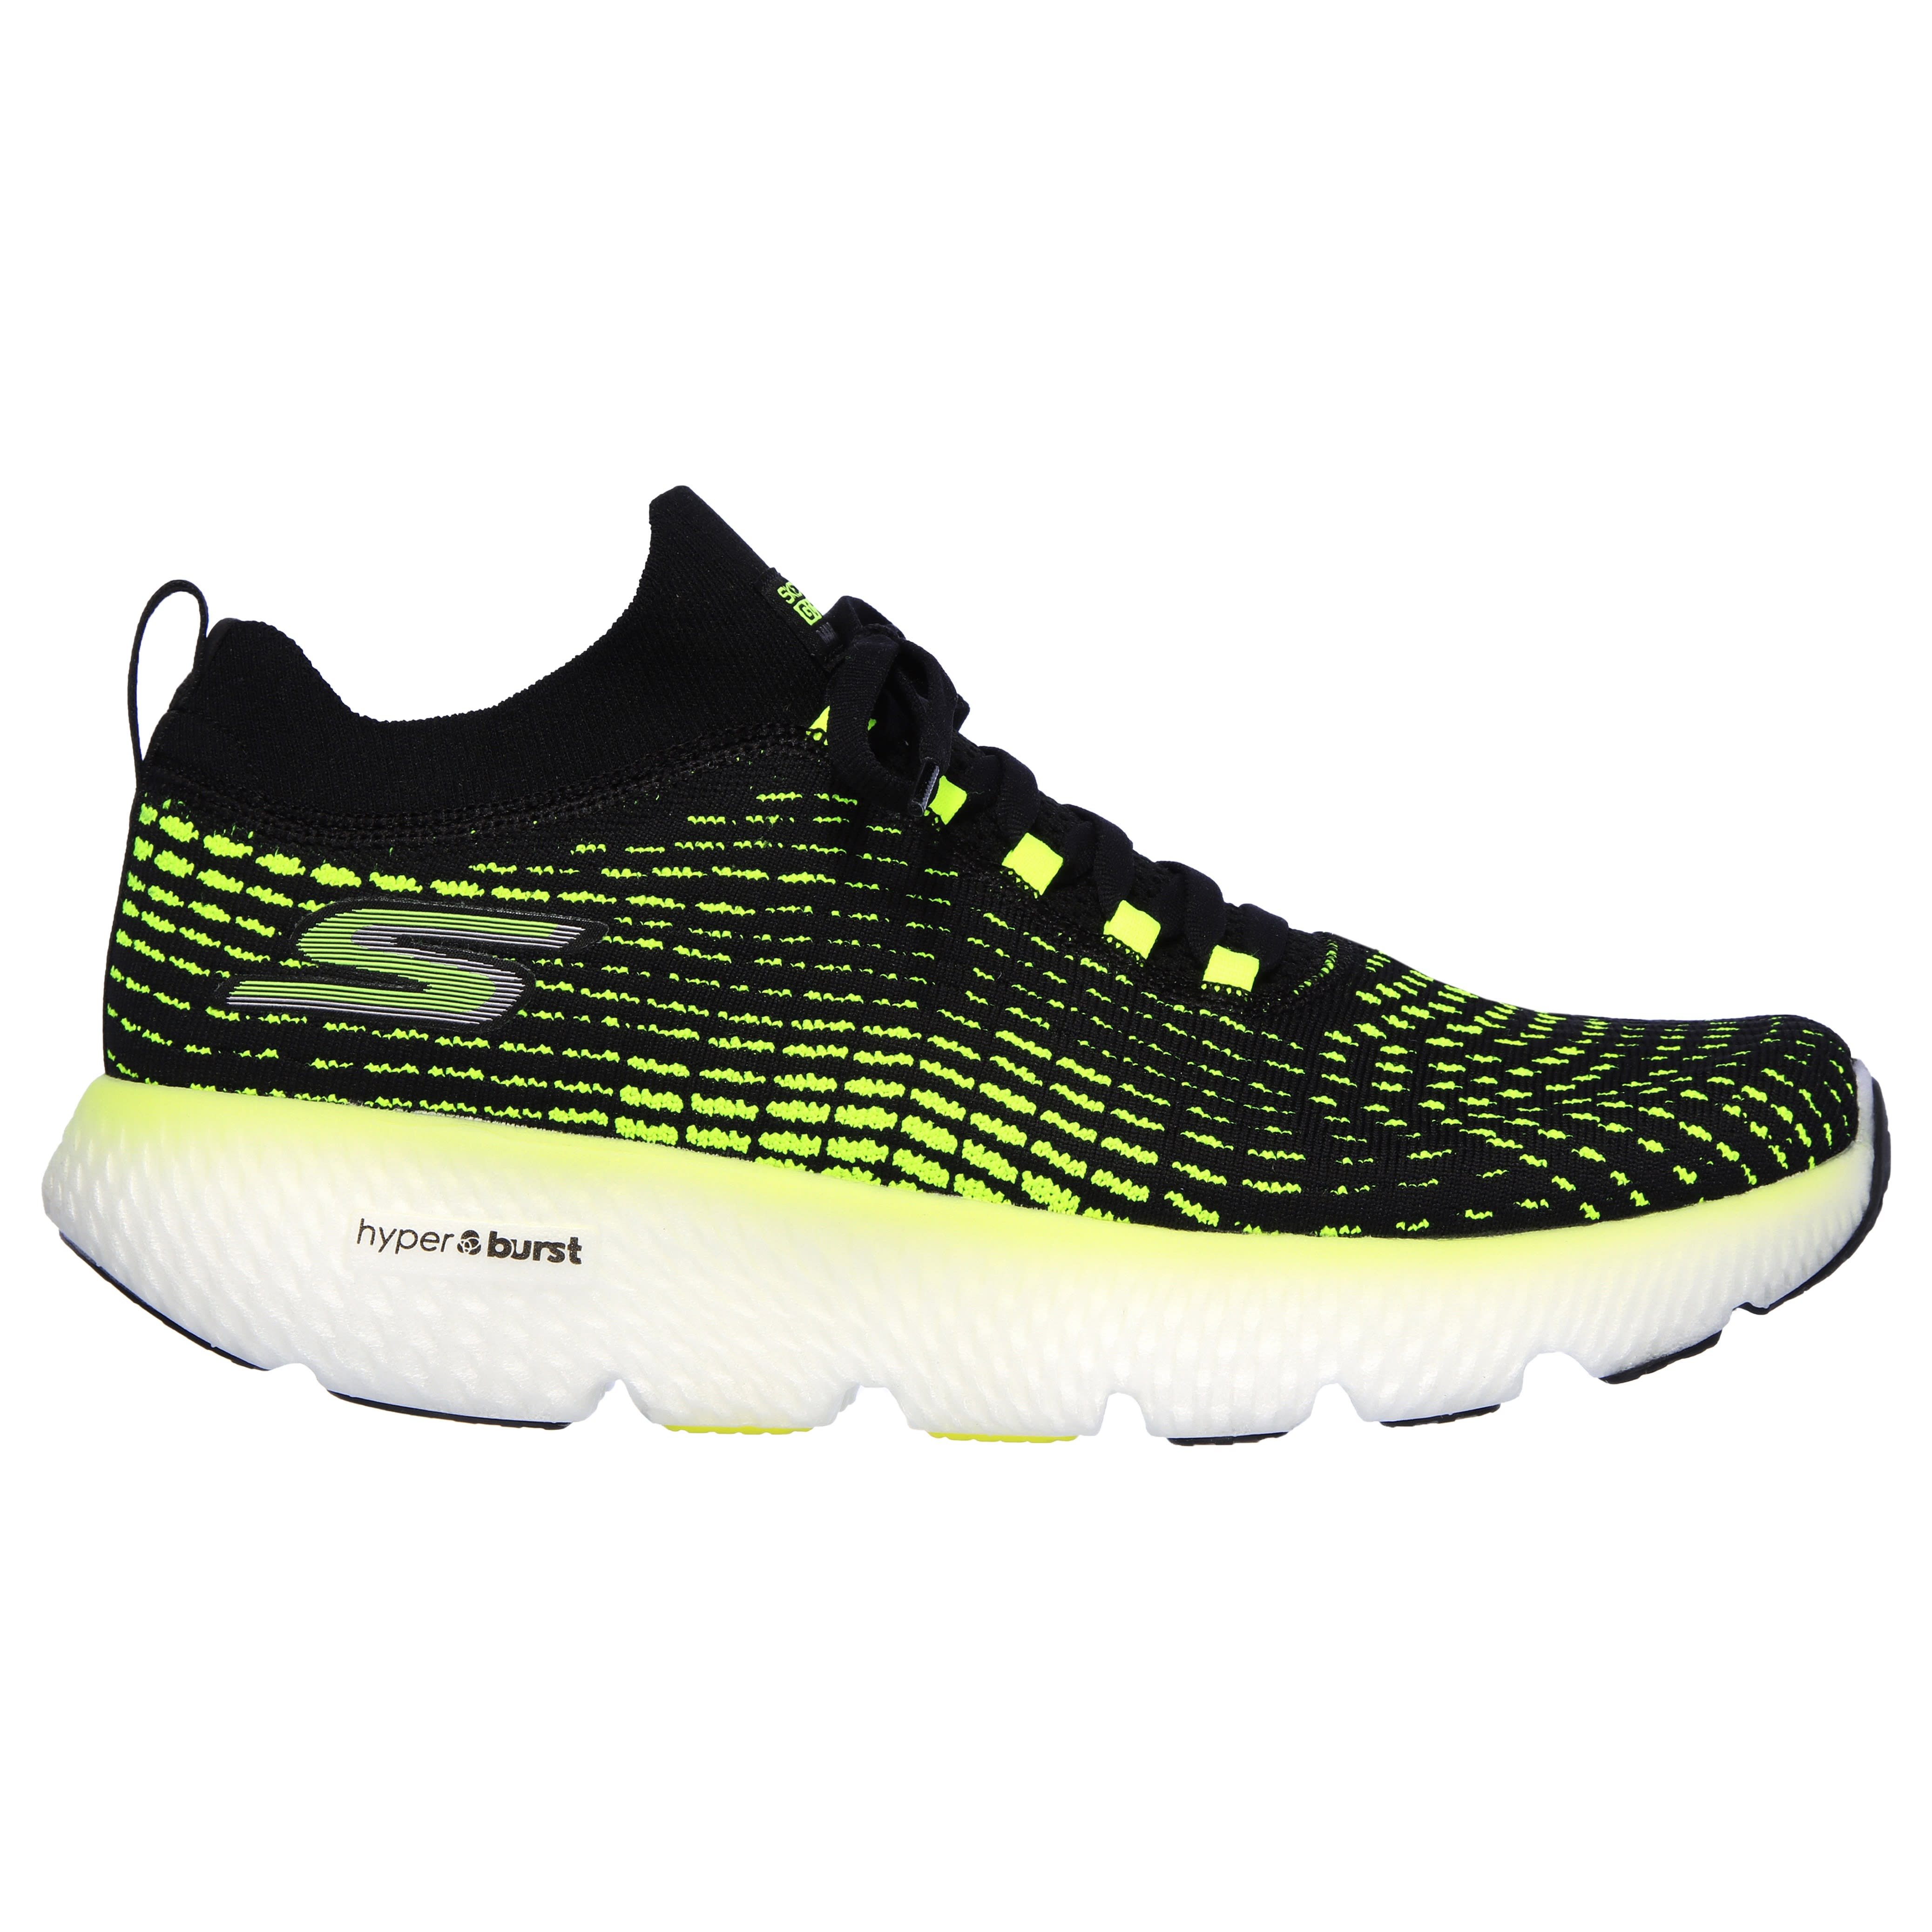 Buy Skechers Men's Max Road 4 from Outnorth